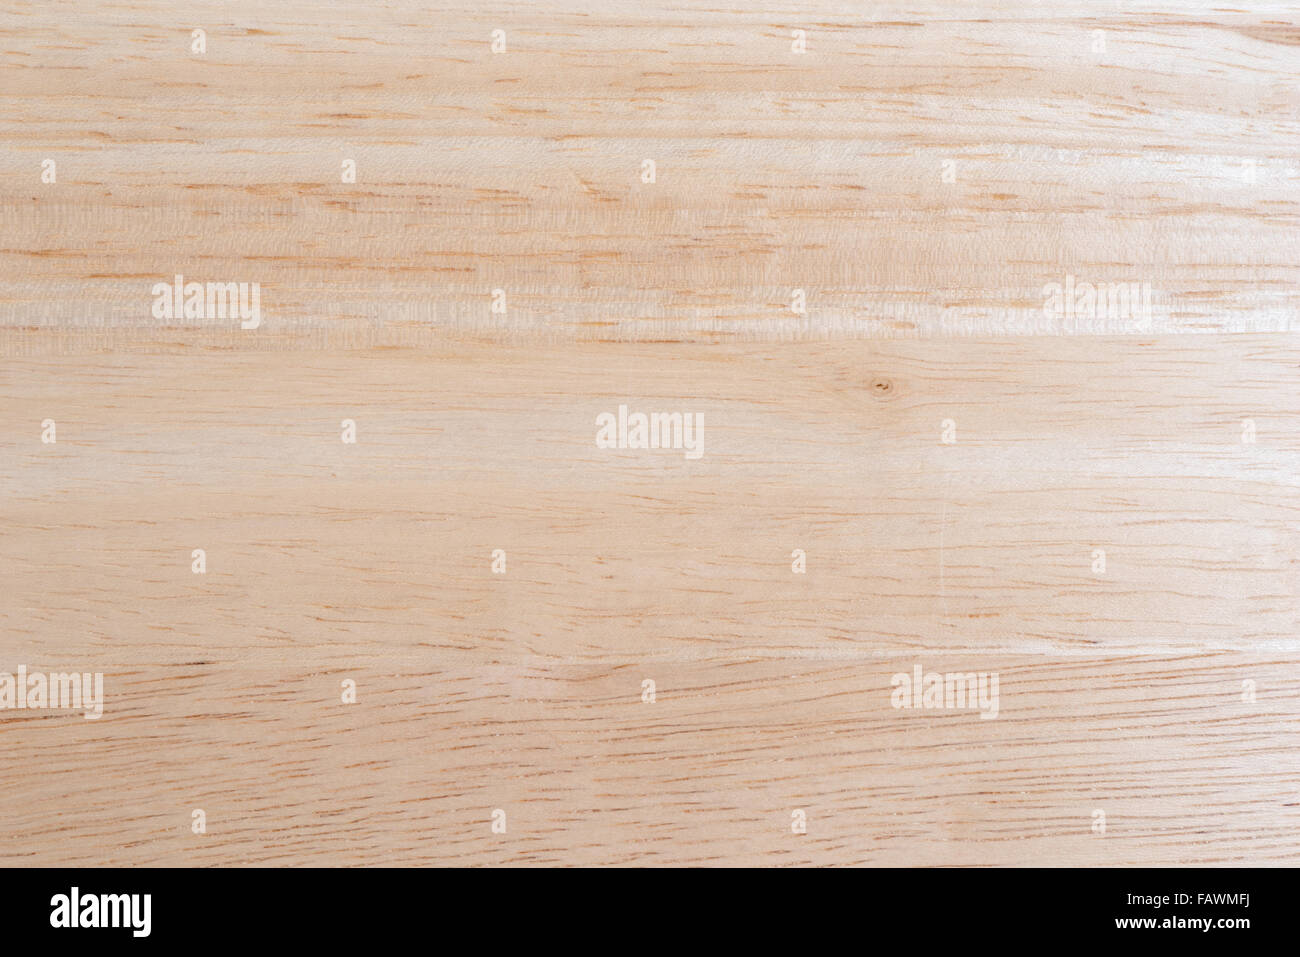 A clean wood glued table top illuminated with natural light. Stock Photo